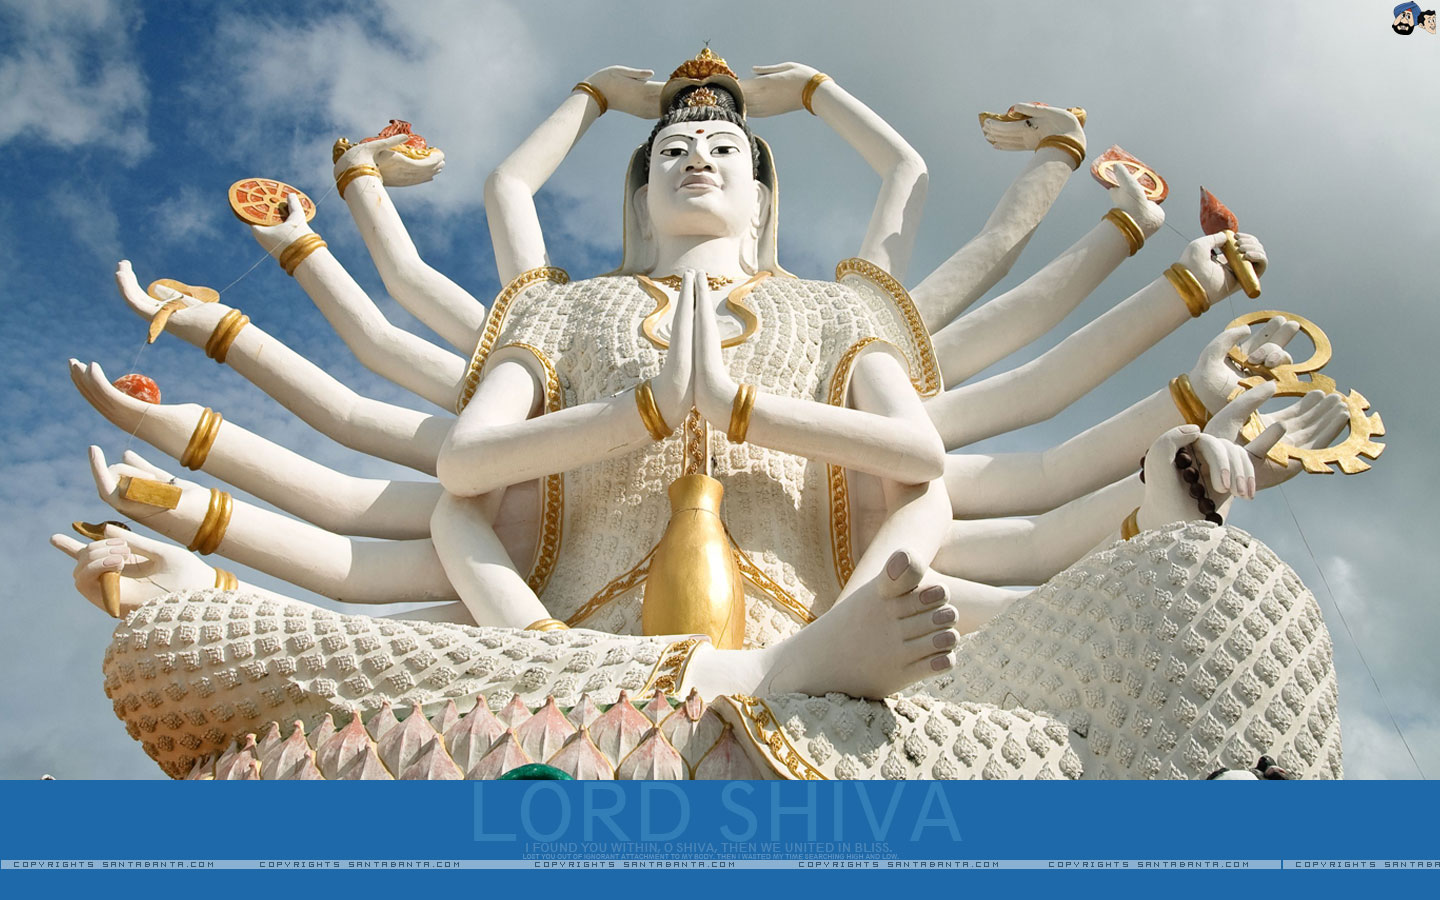 Latest [1200+] Lord Shiva Images, HD Wallpapers, Photos, Pictures,  Paintings, illustrations | SocialStatusDP.com